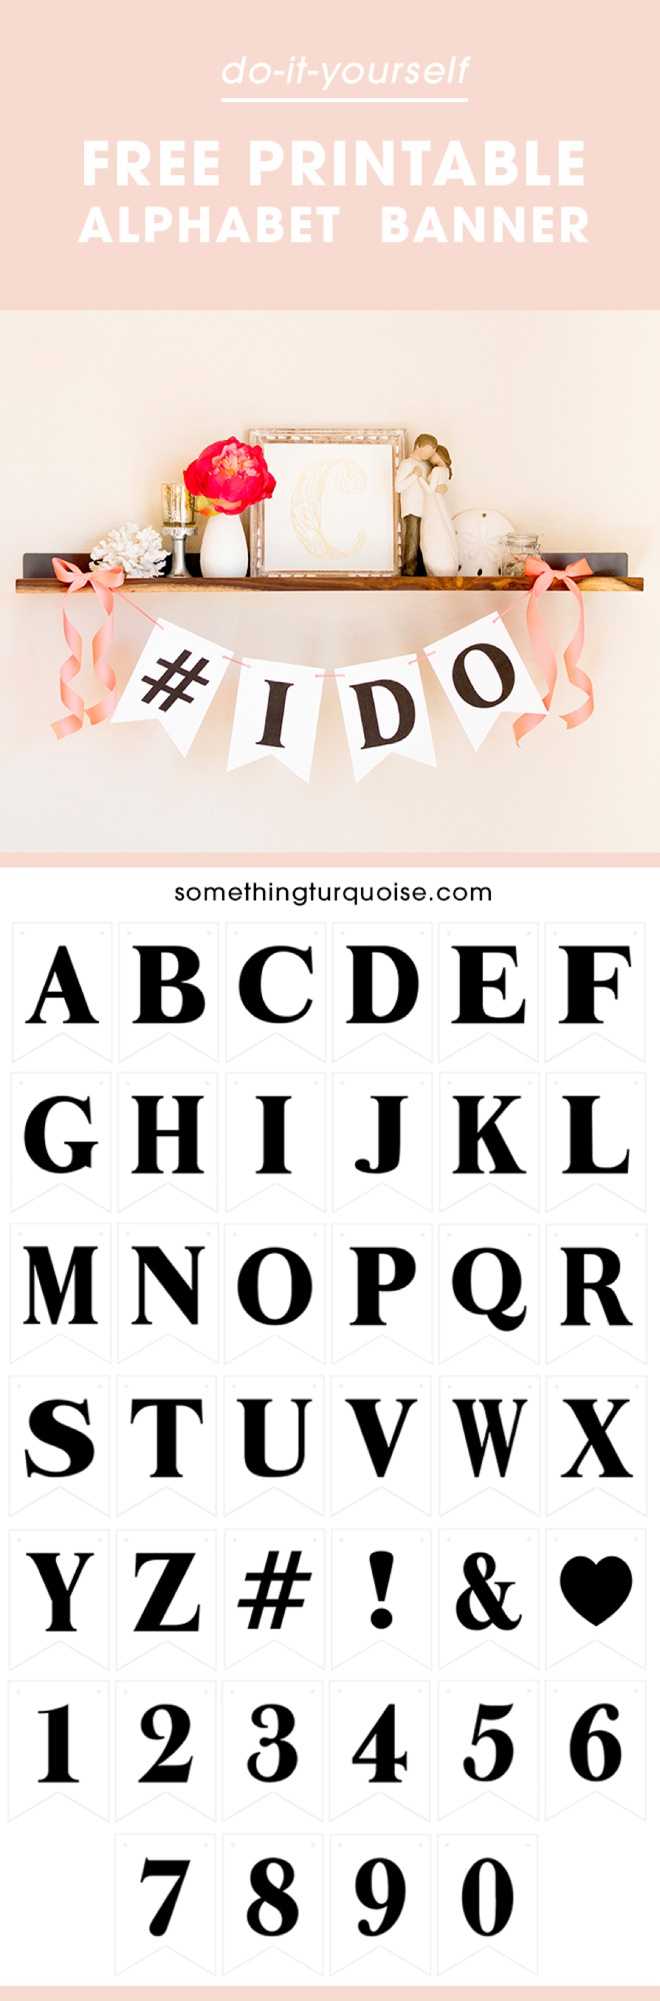 Free Printable Alphabet And Number Banner! Adorable! Within Letter Templates For Banners